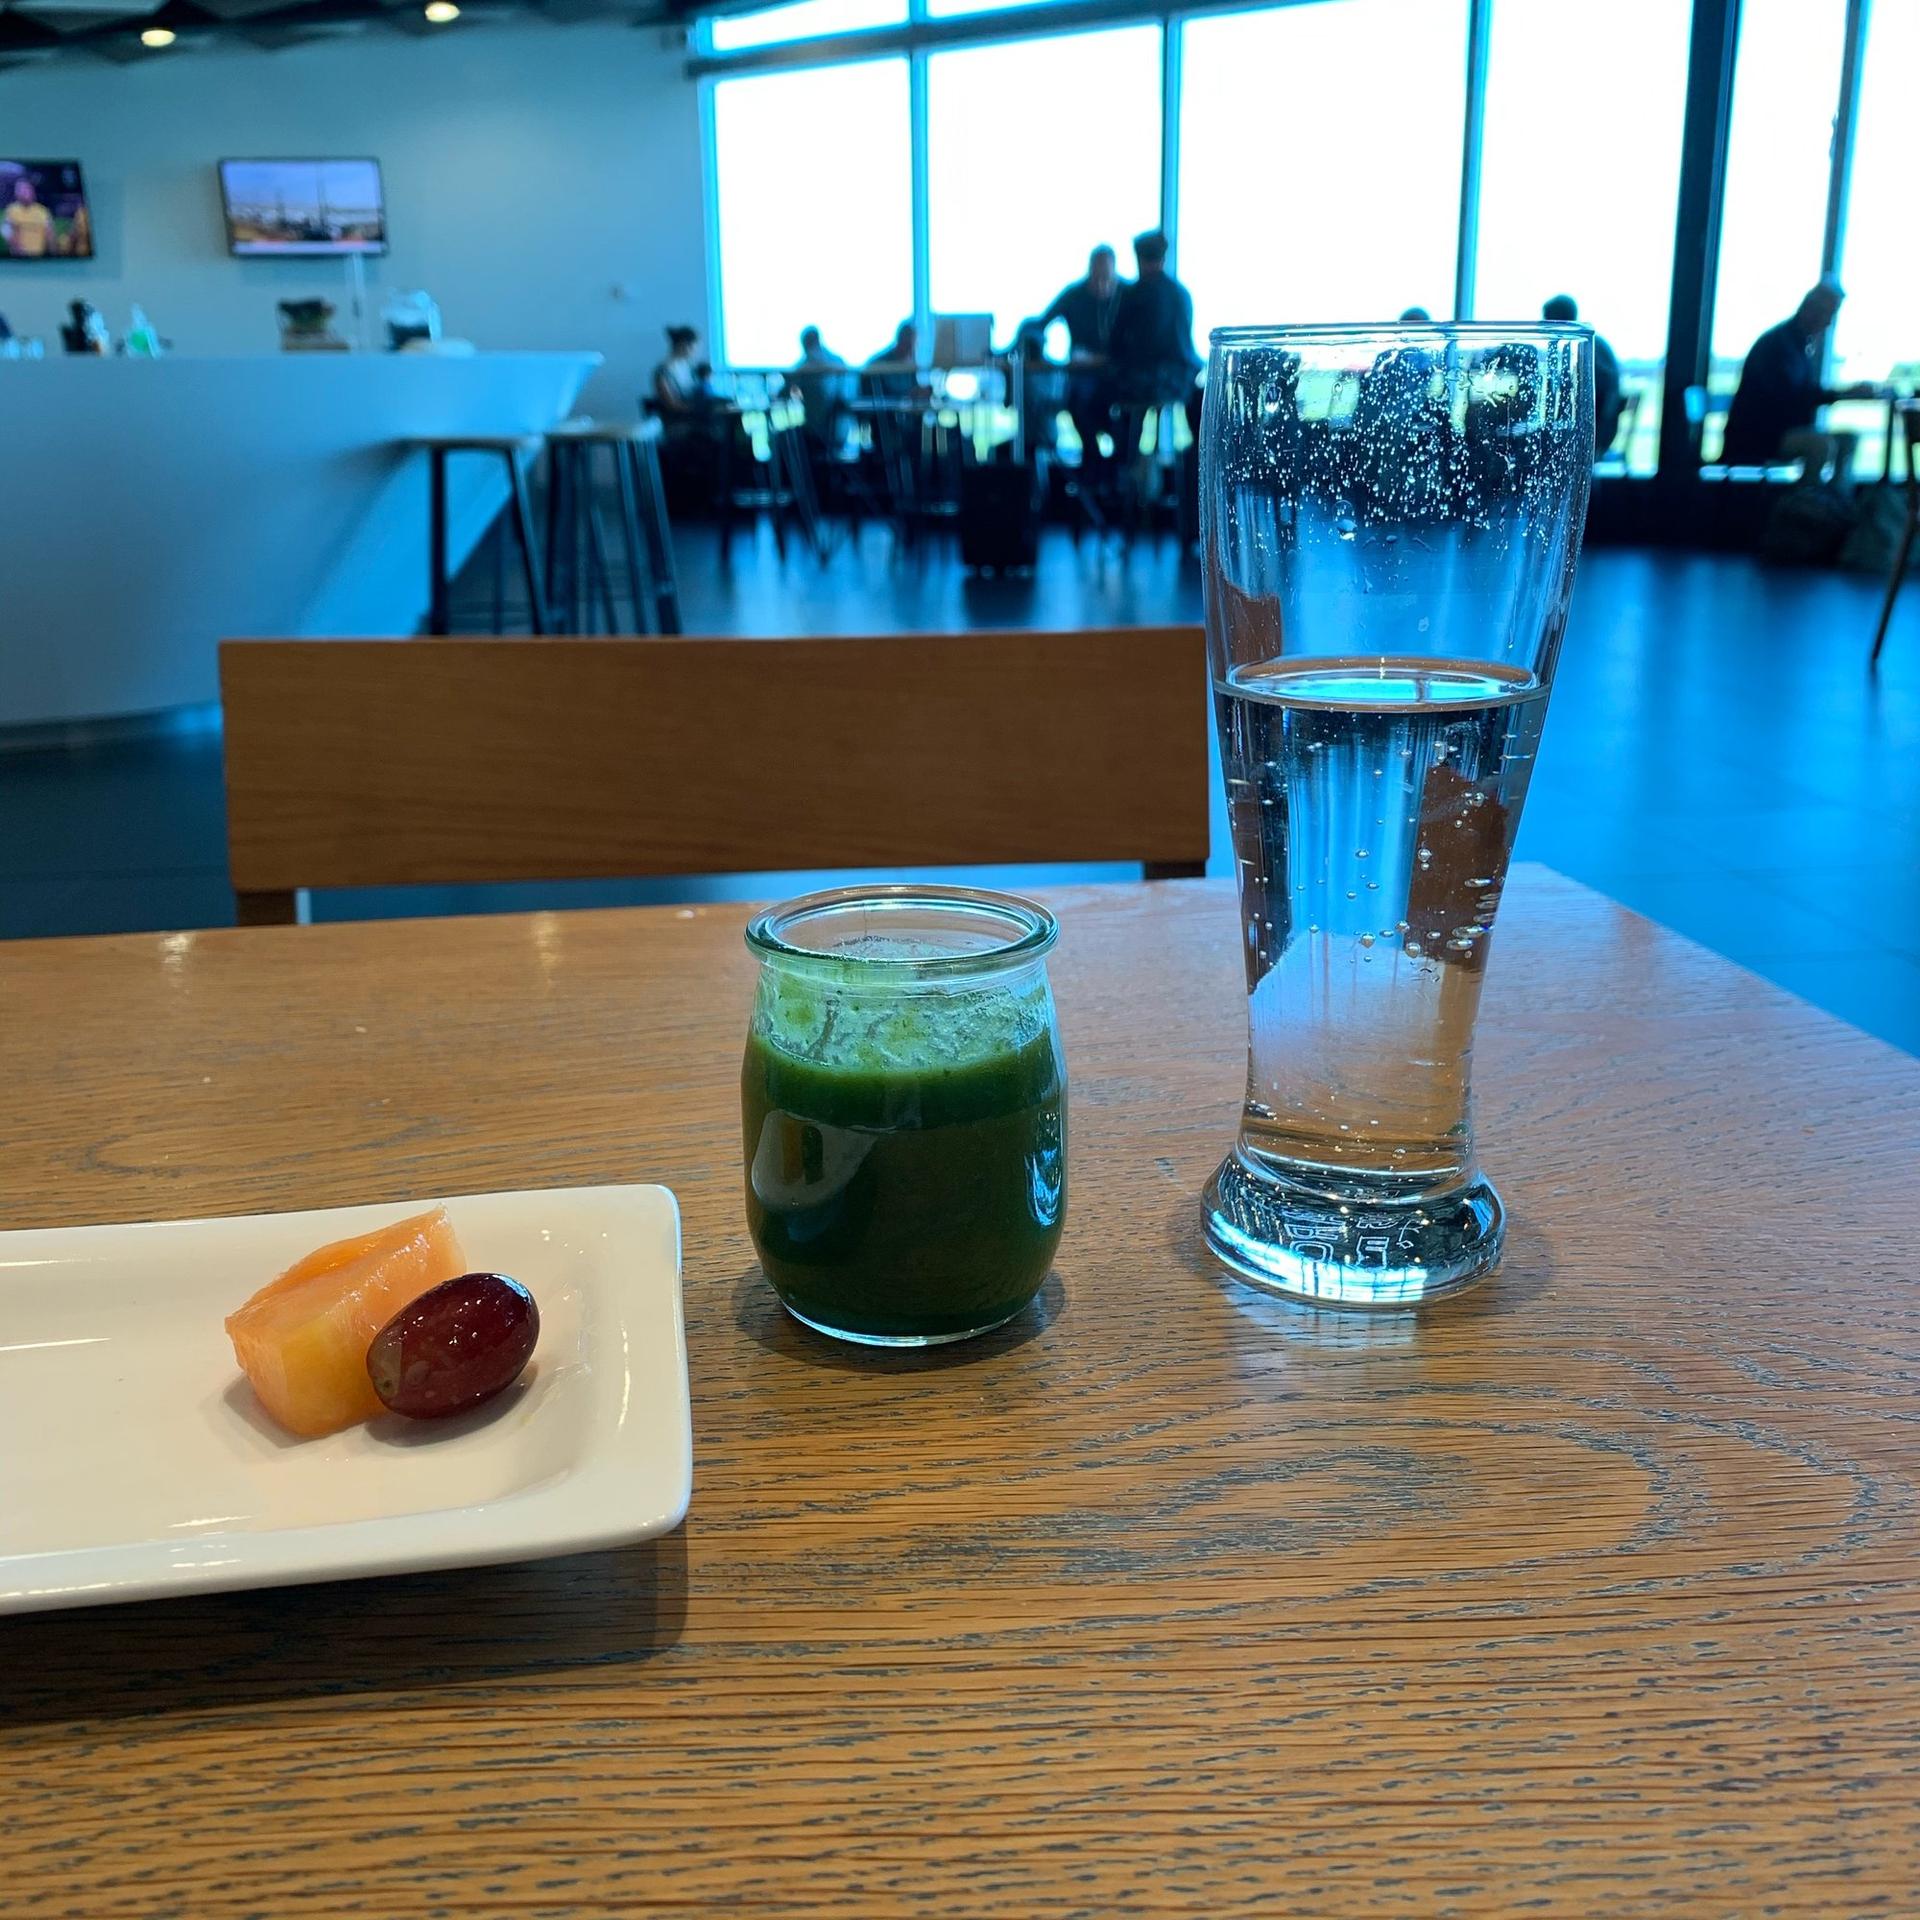 Air New Zealand Domestic Lounge image 1 of 6